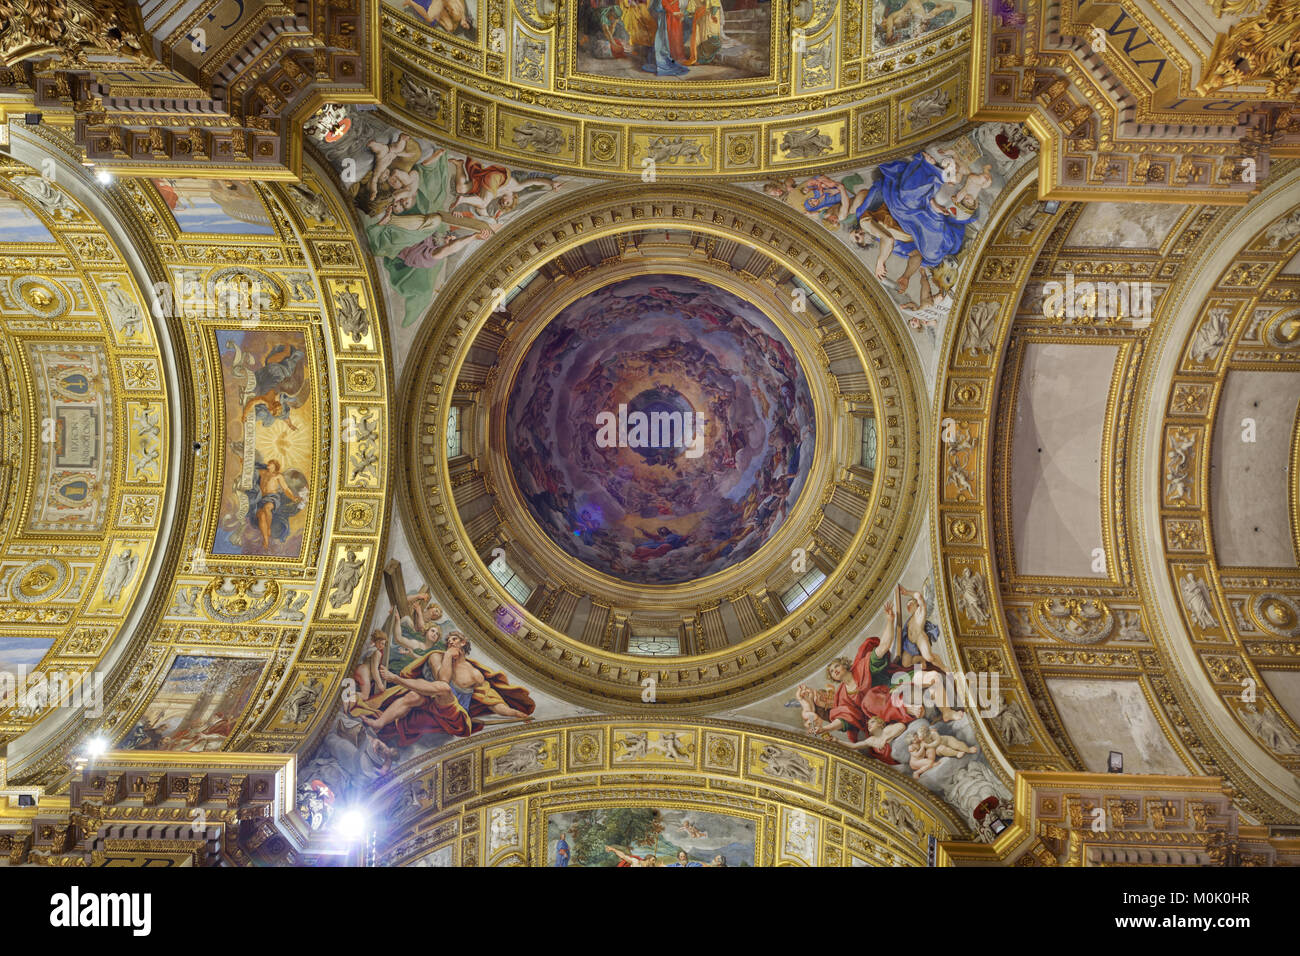 The Triumph of Colors: an extraordinary cycle of frescoes on the ceiling of Sant'Andrea della Valle in Rome (Dome) Stock Photo